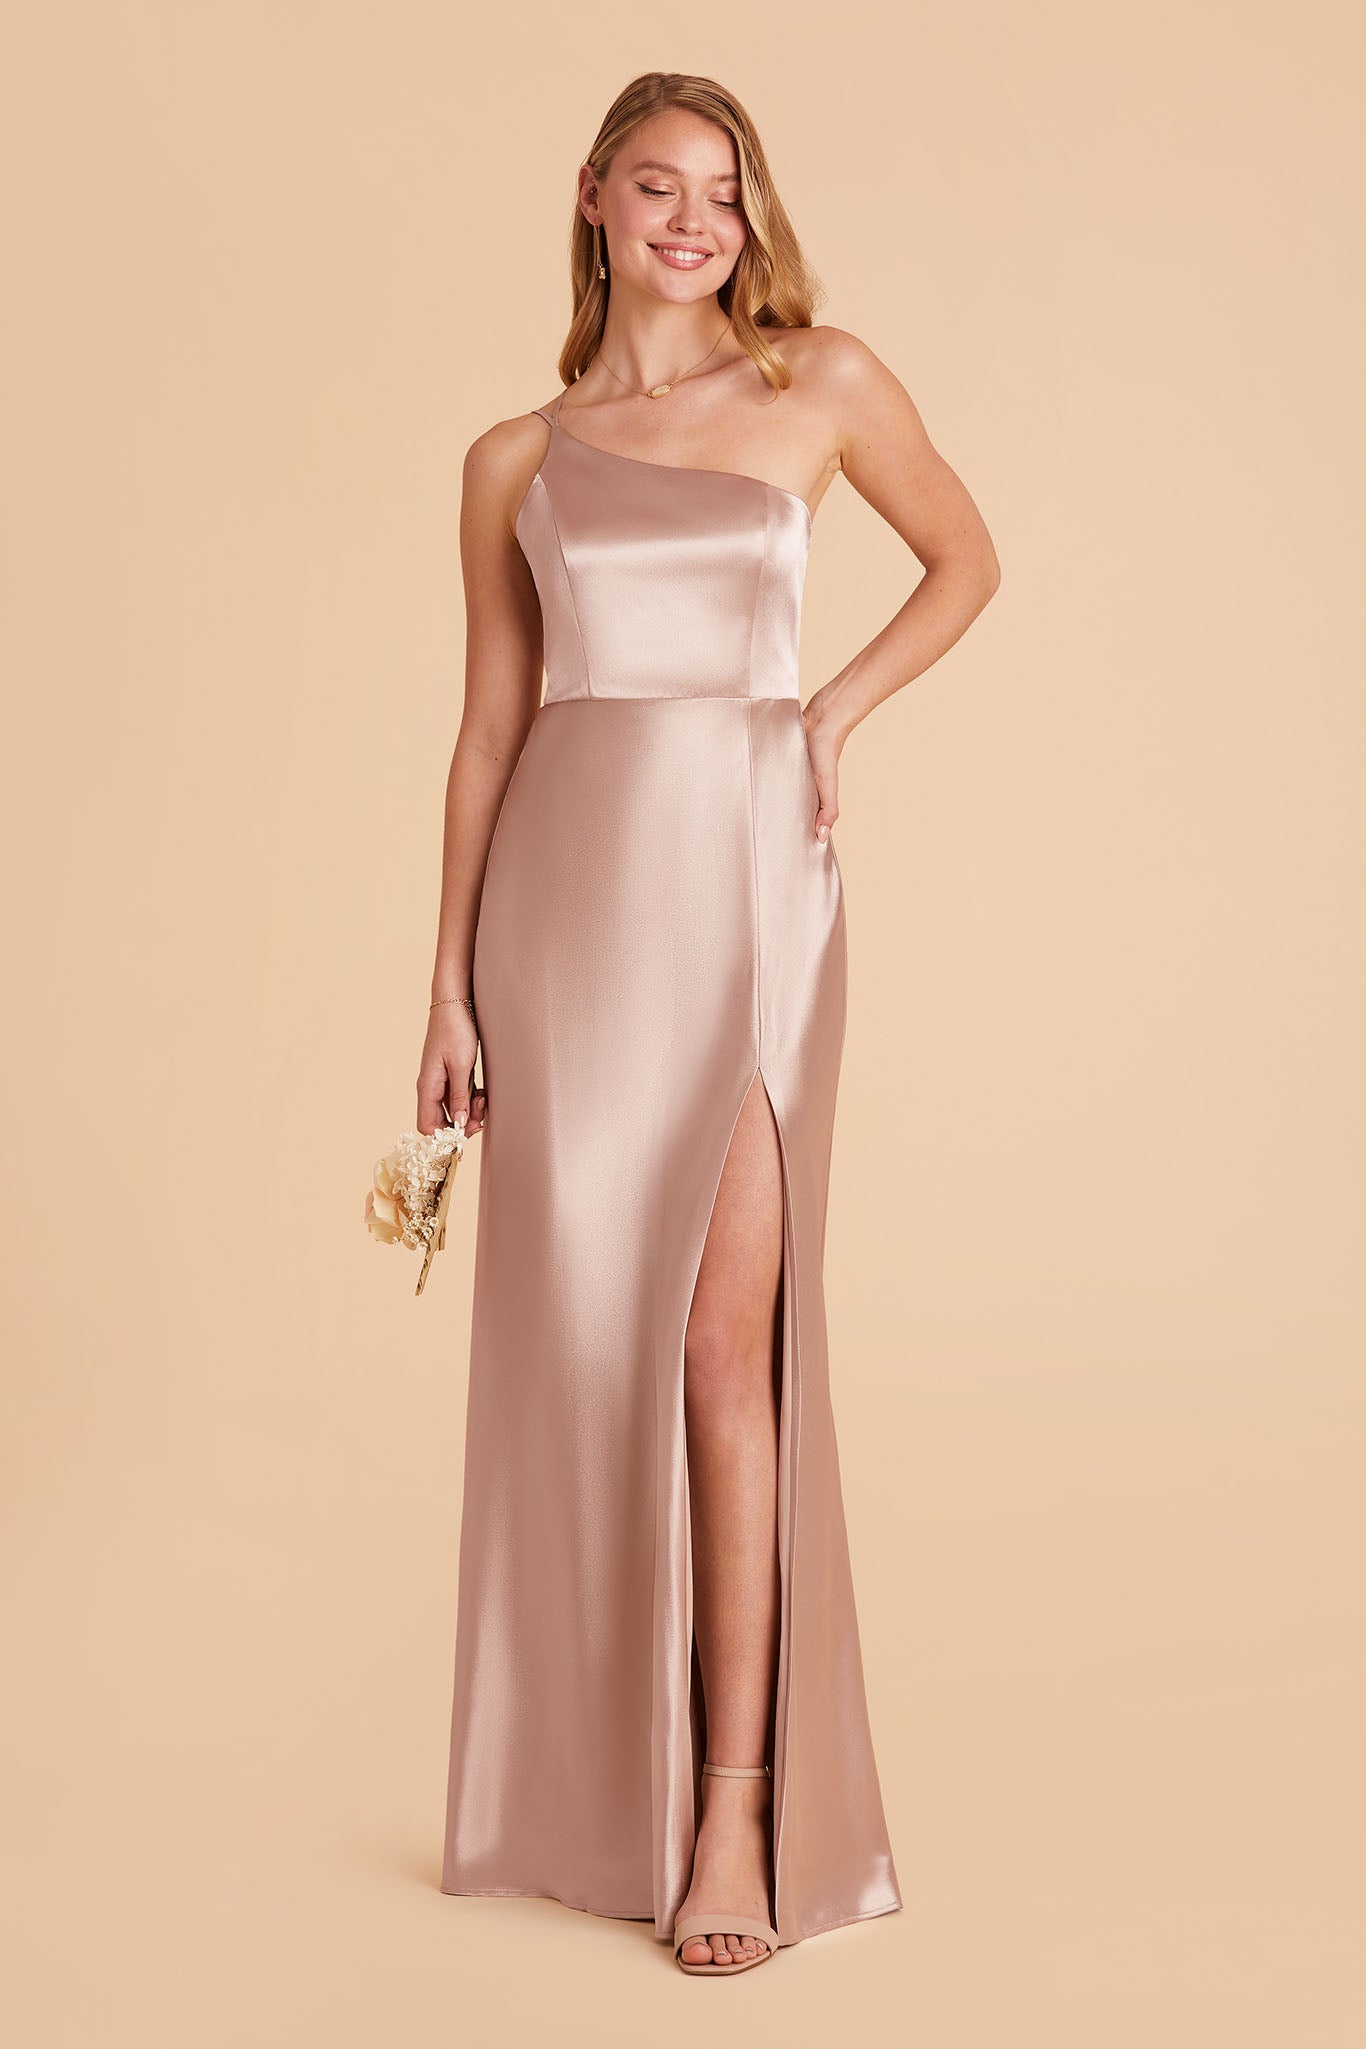 taupe color dress